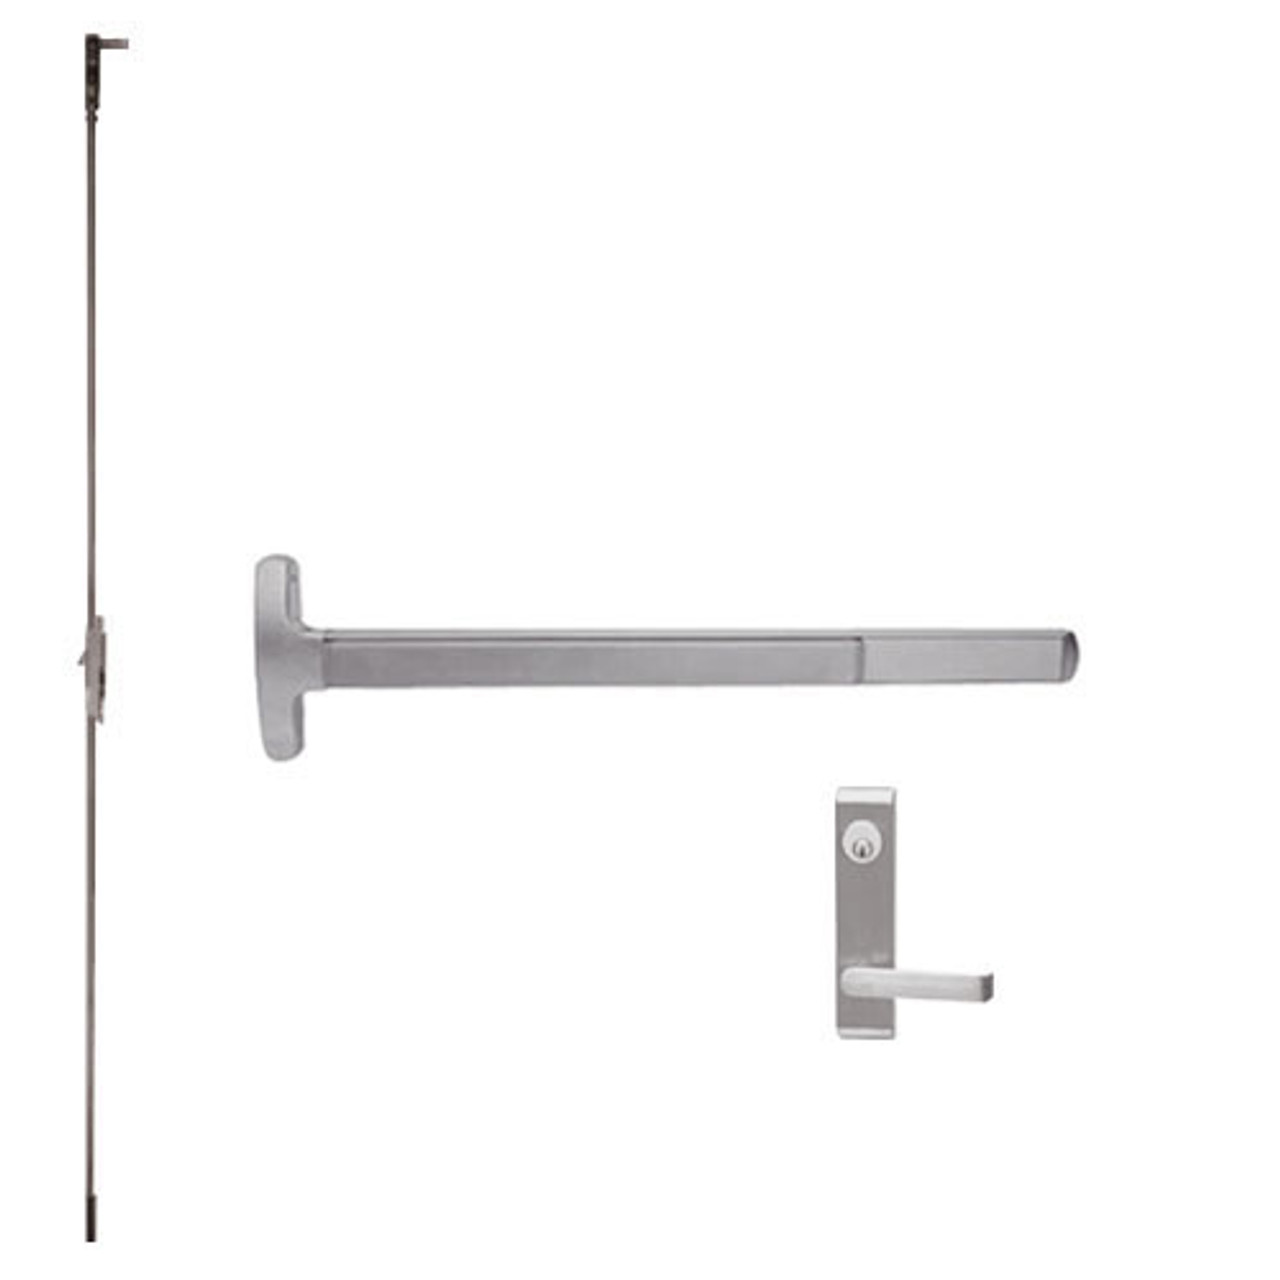 F-24-C-L-DANE-US32D-2-LHR Falcon Exit Device in Satin Stainless Steel